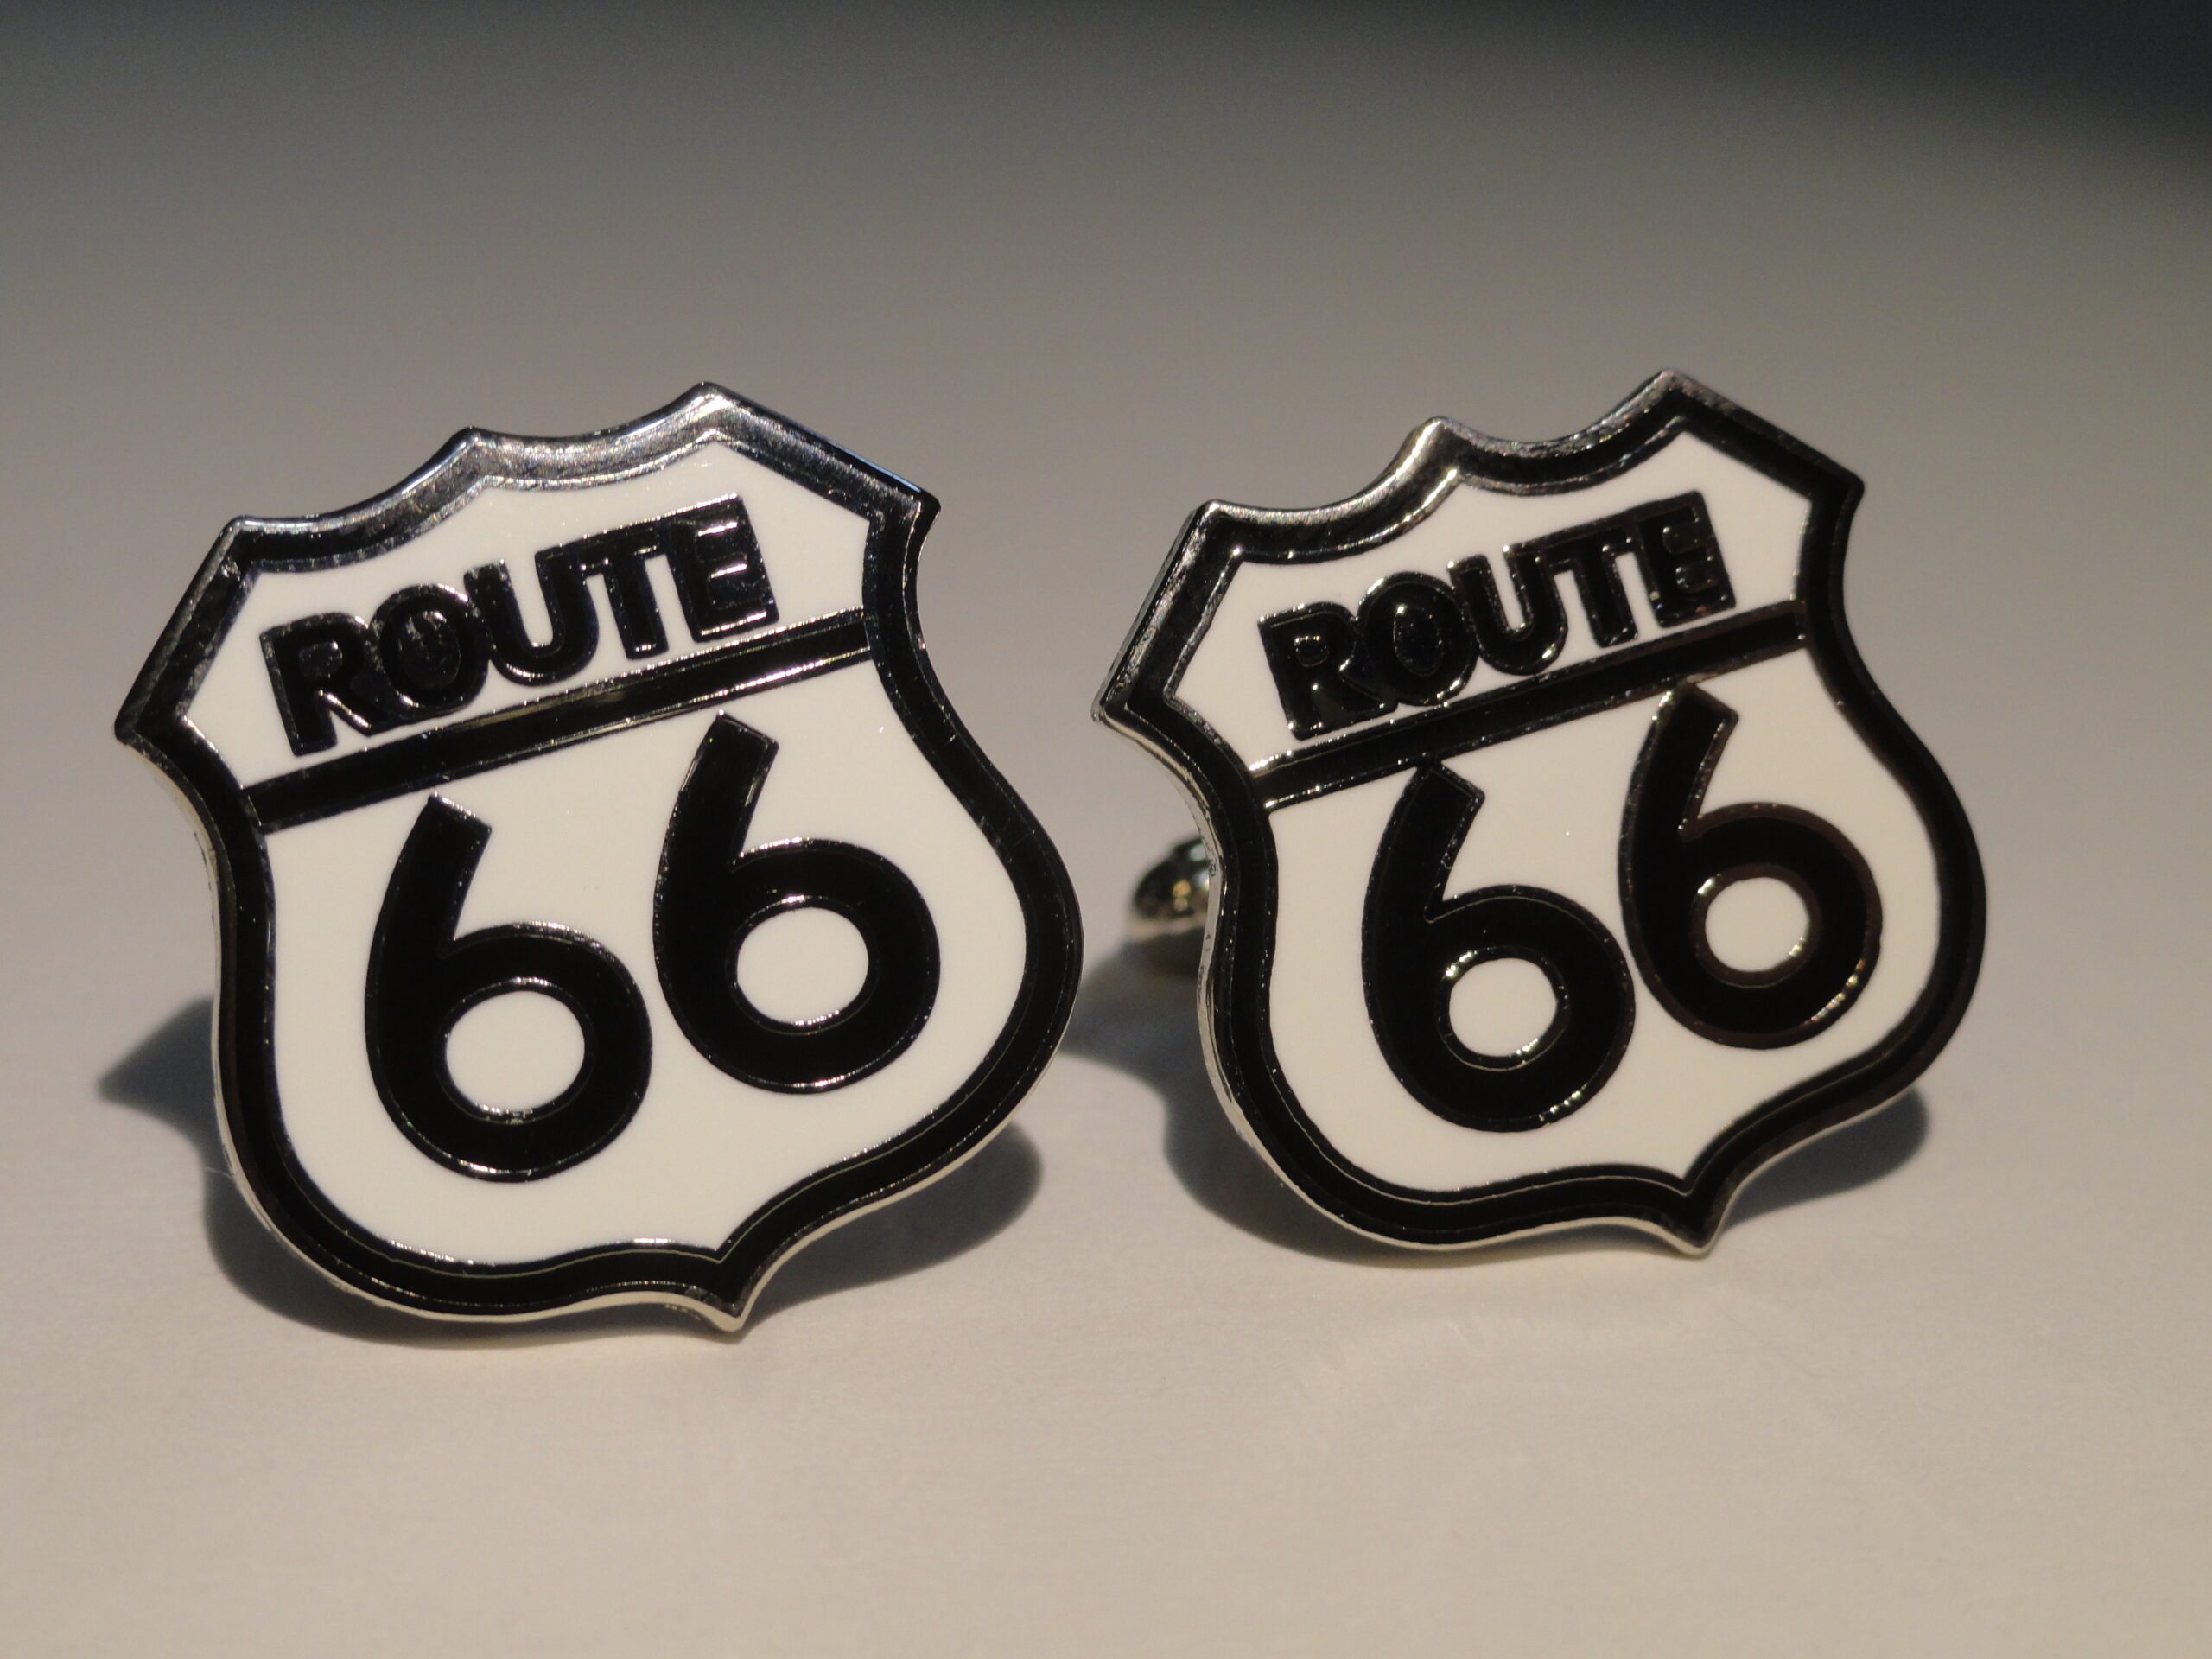 Angled Edition Route 66 Cufflinks Historic Route 66 Highway Cuff Links